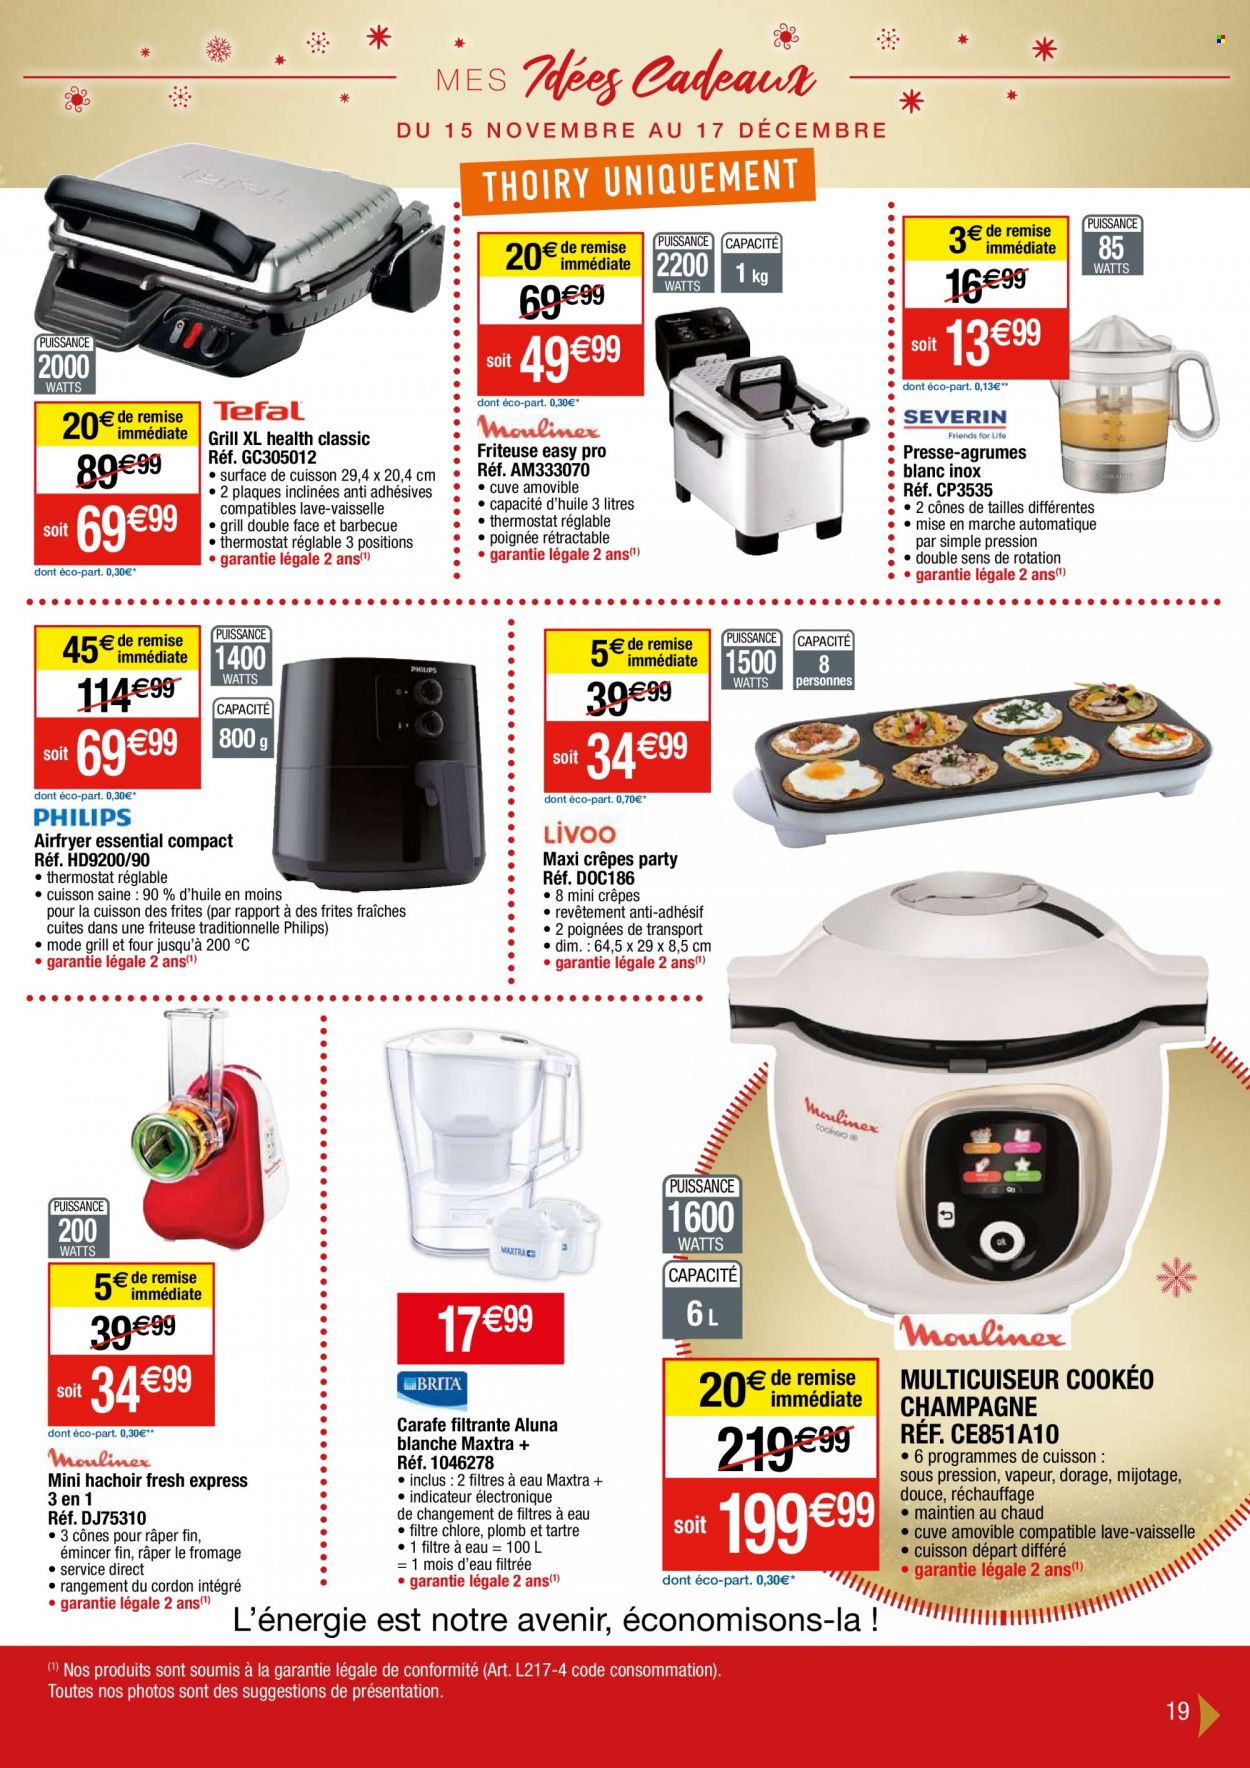 thumbnail - Catalogue Migros France - 15/11/2022 - 17/12/2022 - Produits soldés - alcool, Philips, crêpes, fromage, champagne, carafe, hachoir, carafe filtrante, Presse-Agrumes, friteuse, cônes, grill. Page 19.